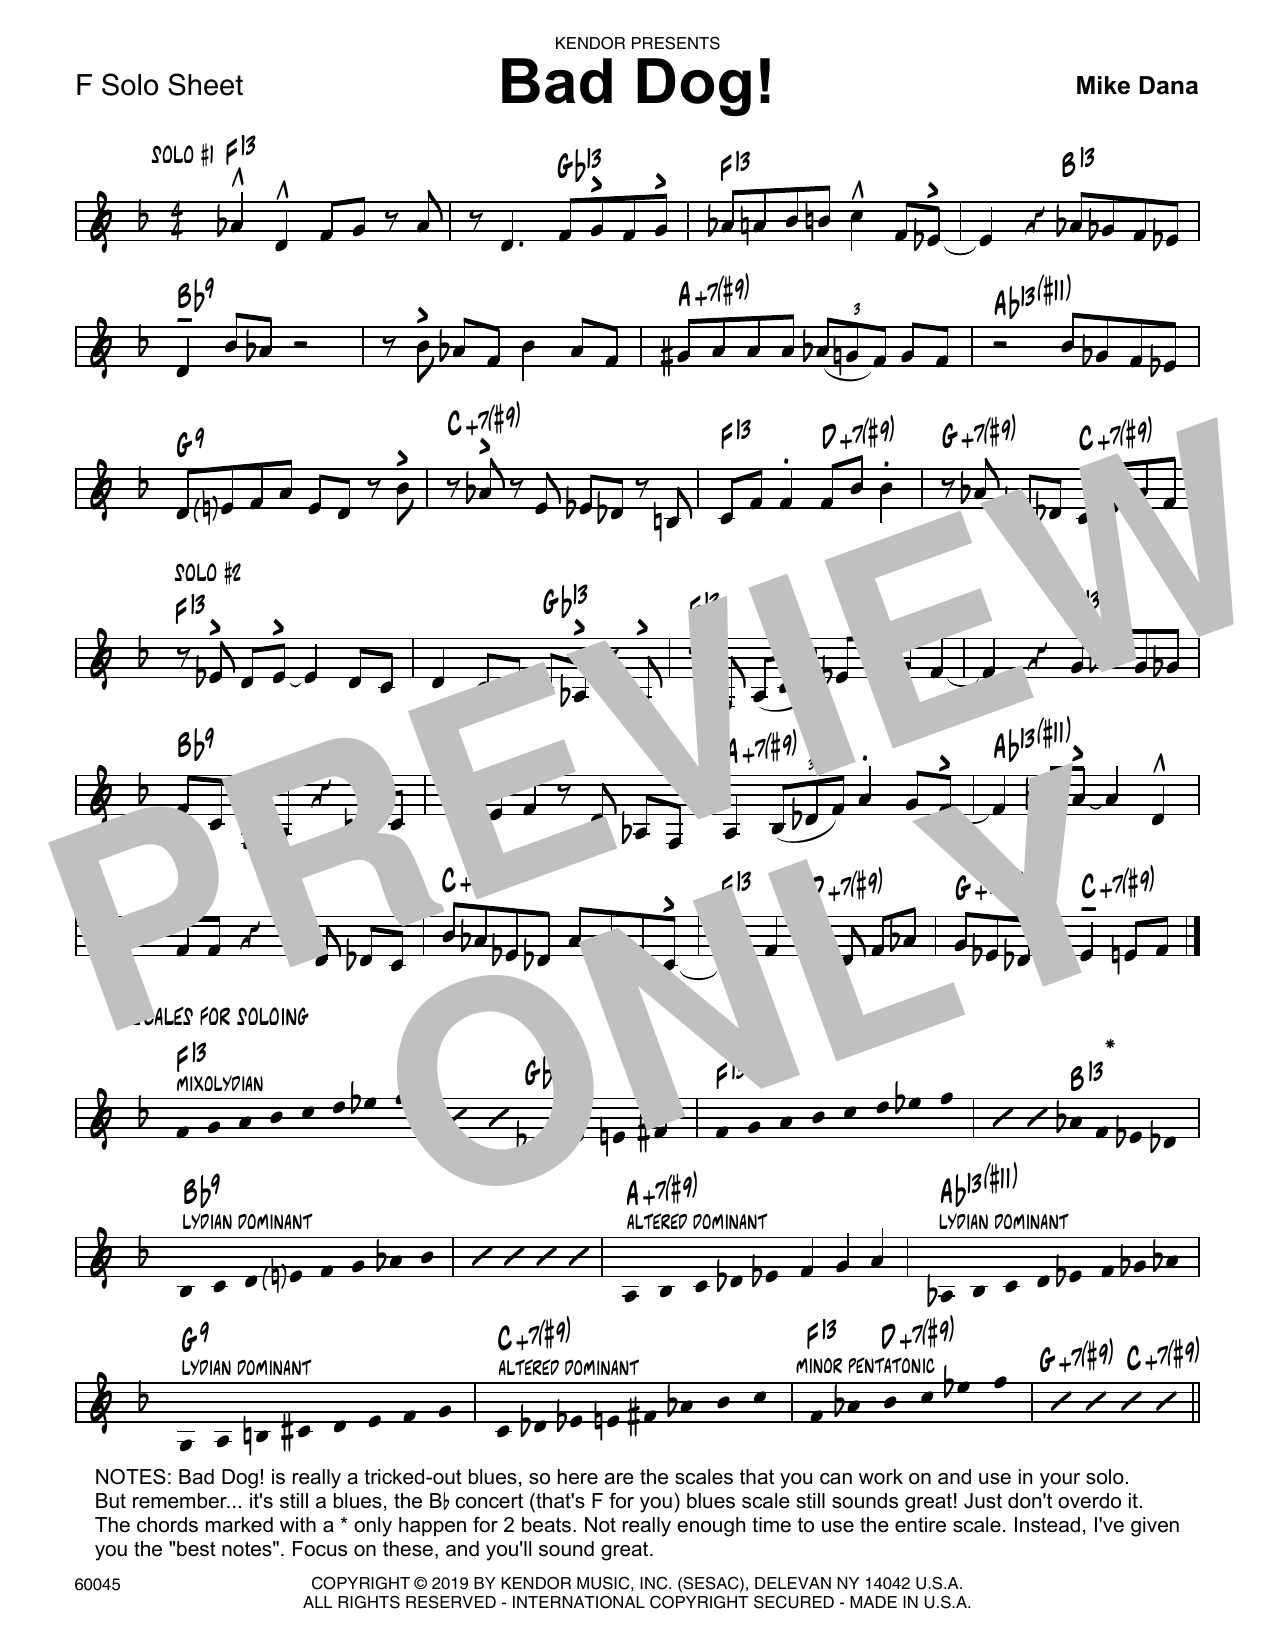 Download Mike Dana Bad Dog! - Solo Sheet for F Instruments Sheet Music